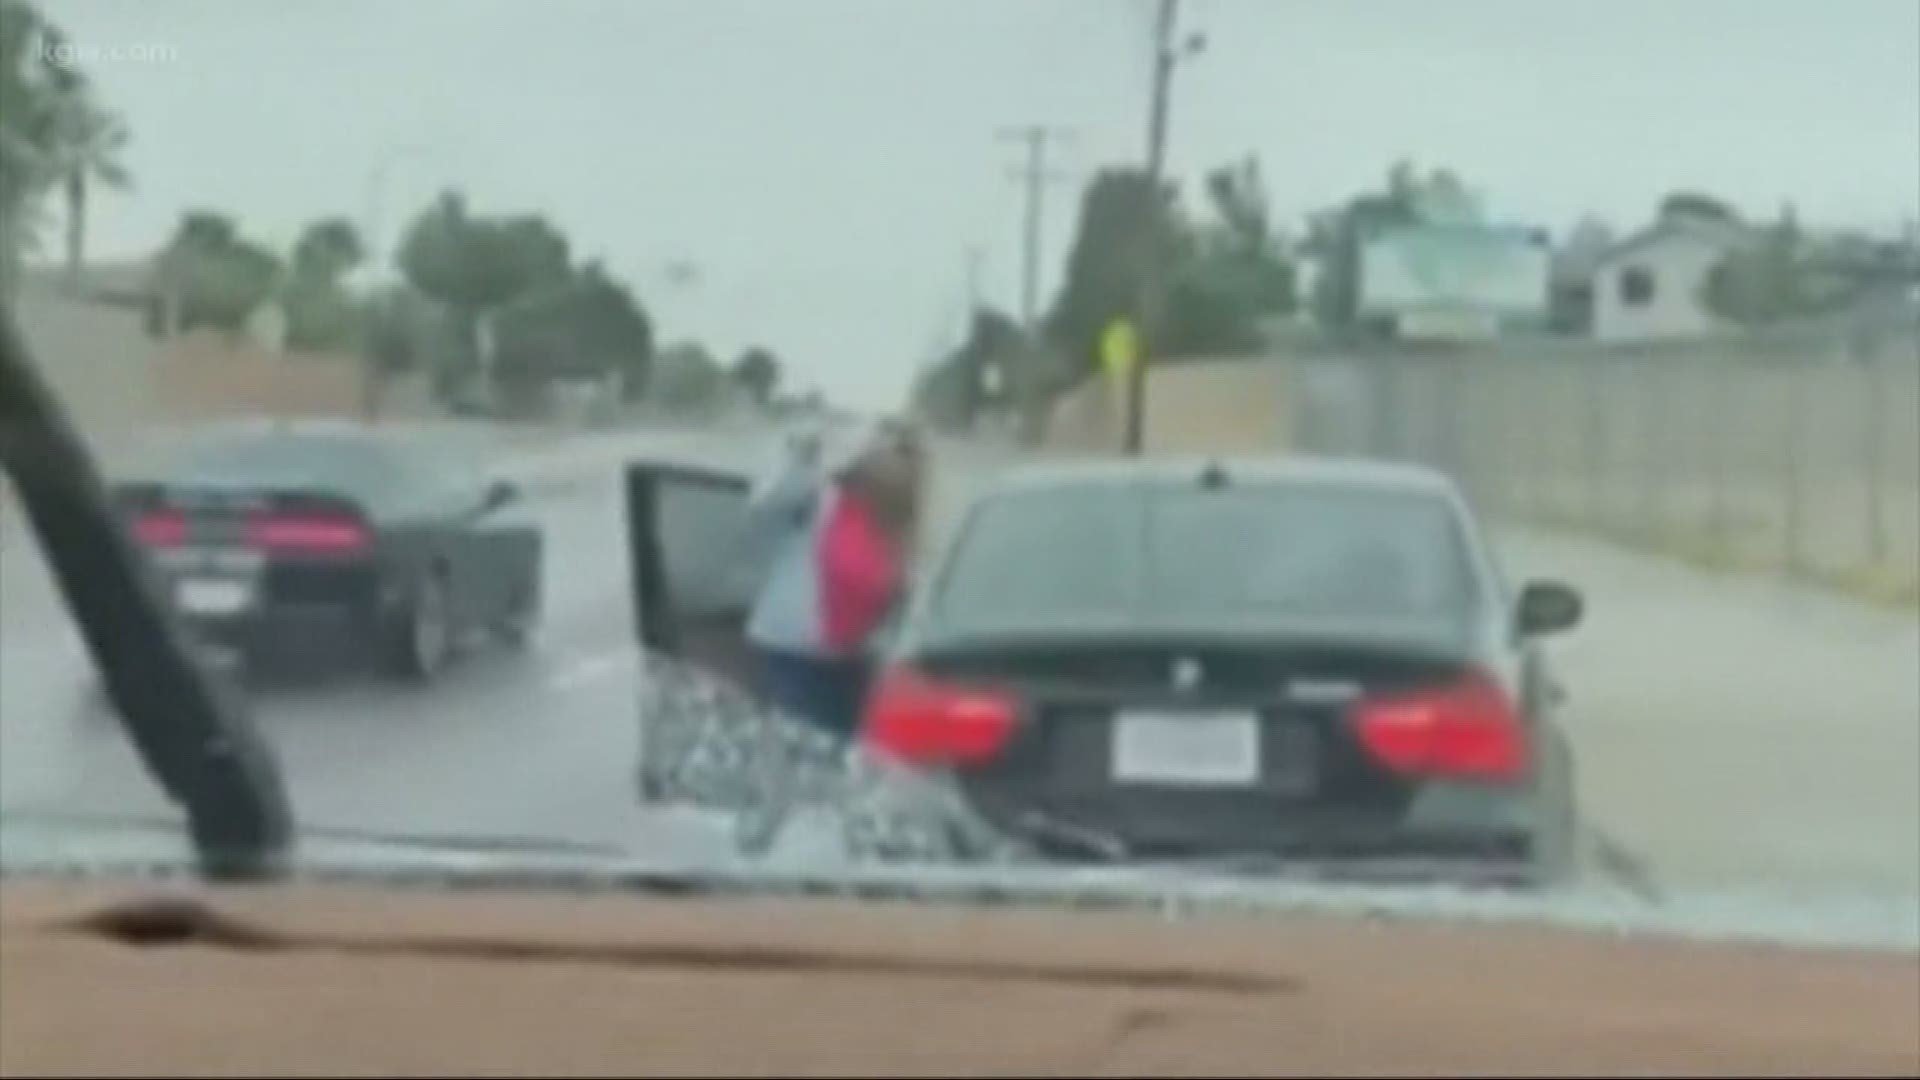 A Texas mother was caught on camera whipping her son in a car.